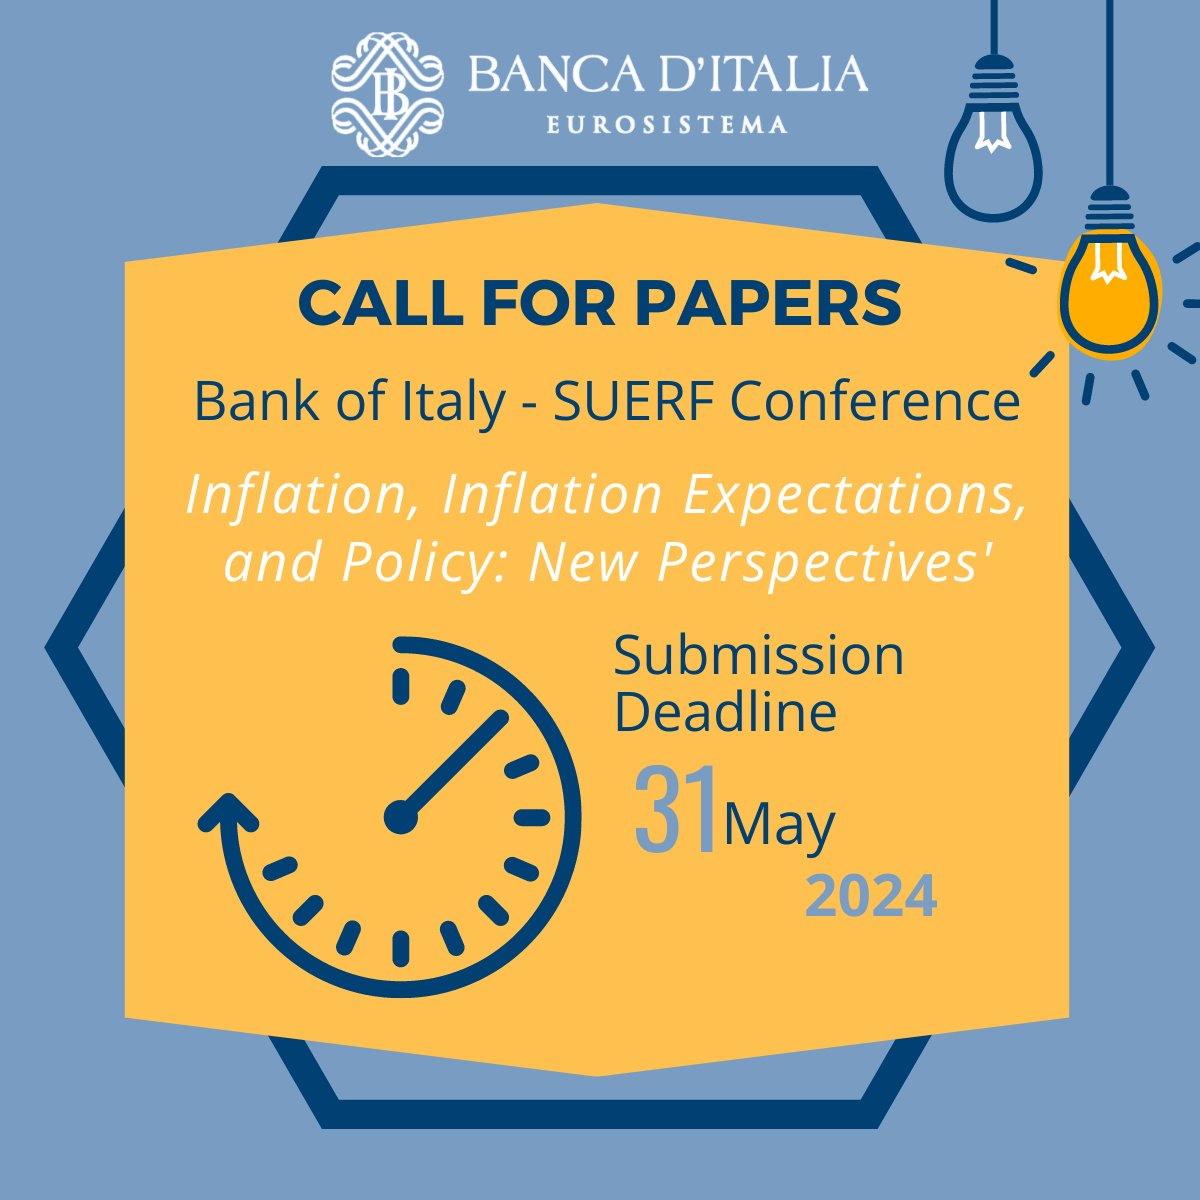 📢 #CallForPapers 📌 Banca d'Italia and @suerf_org Conference 'Inflation, Inflation Expectations, and Policy: New Perspectives', #Rome on November 18-19, 2024 🗓️ Submission Deadline: May 31, 2024 suerf.org/wp-content/upl… Keynote speakers: Philip R. Lane (@ECB) will give the SUERF…